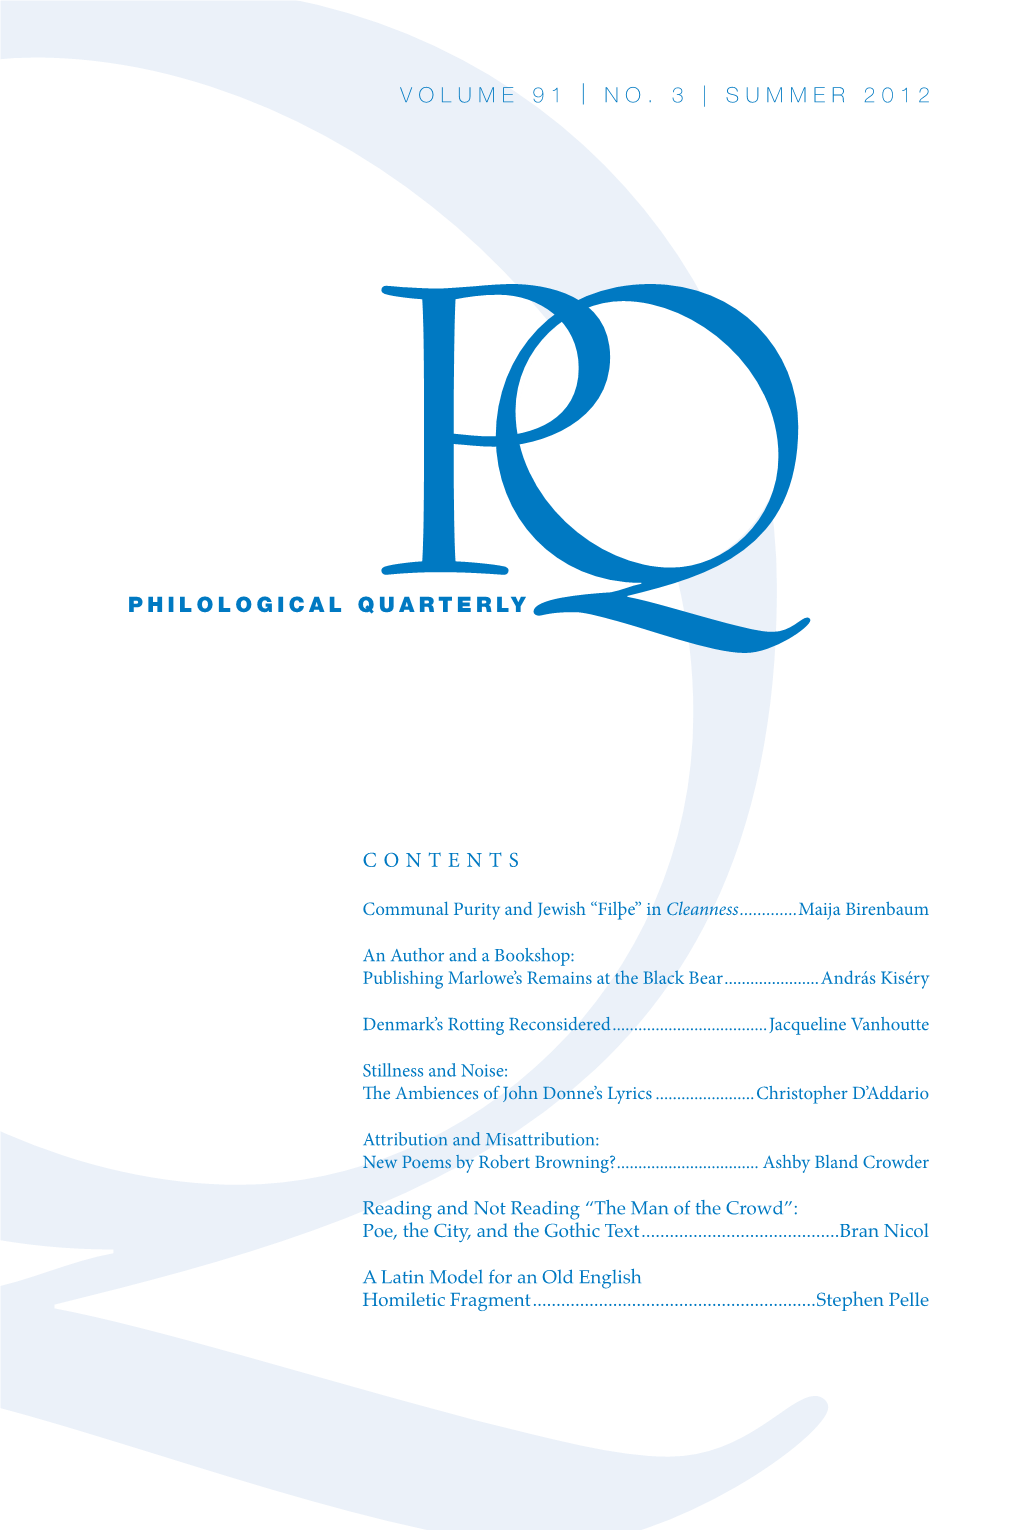 Summer 2012 Philological Quarterly Contents